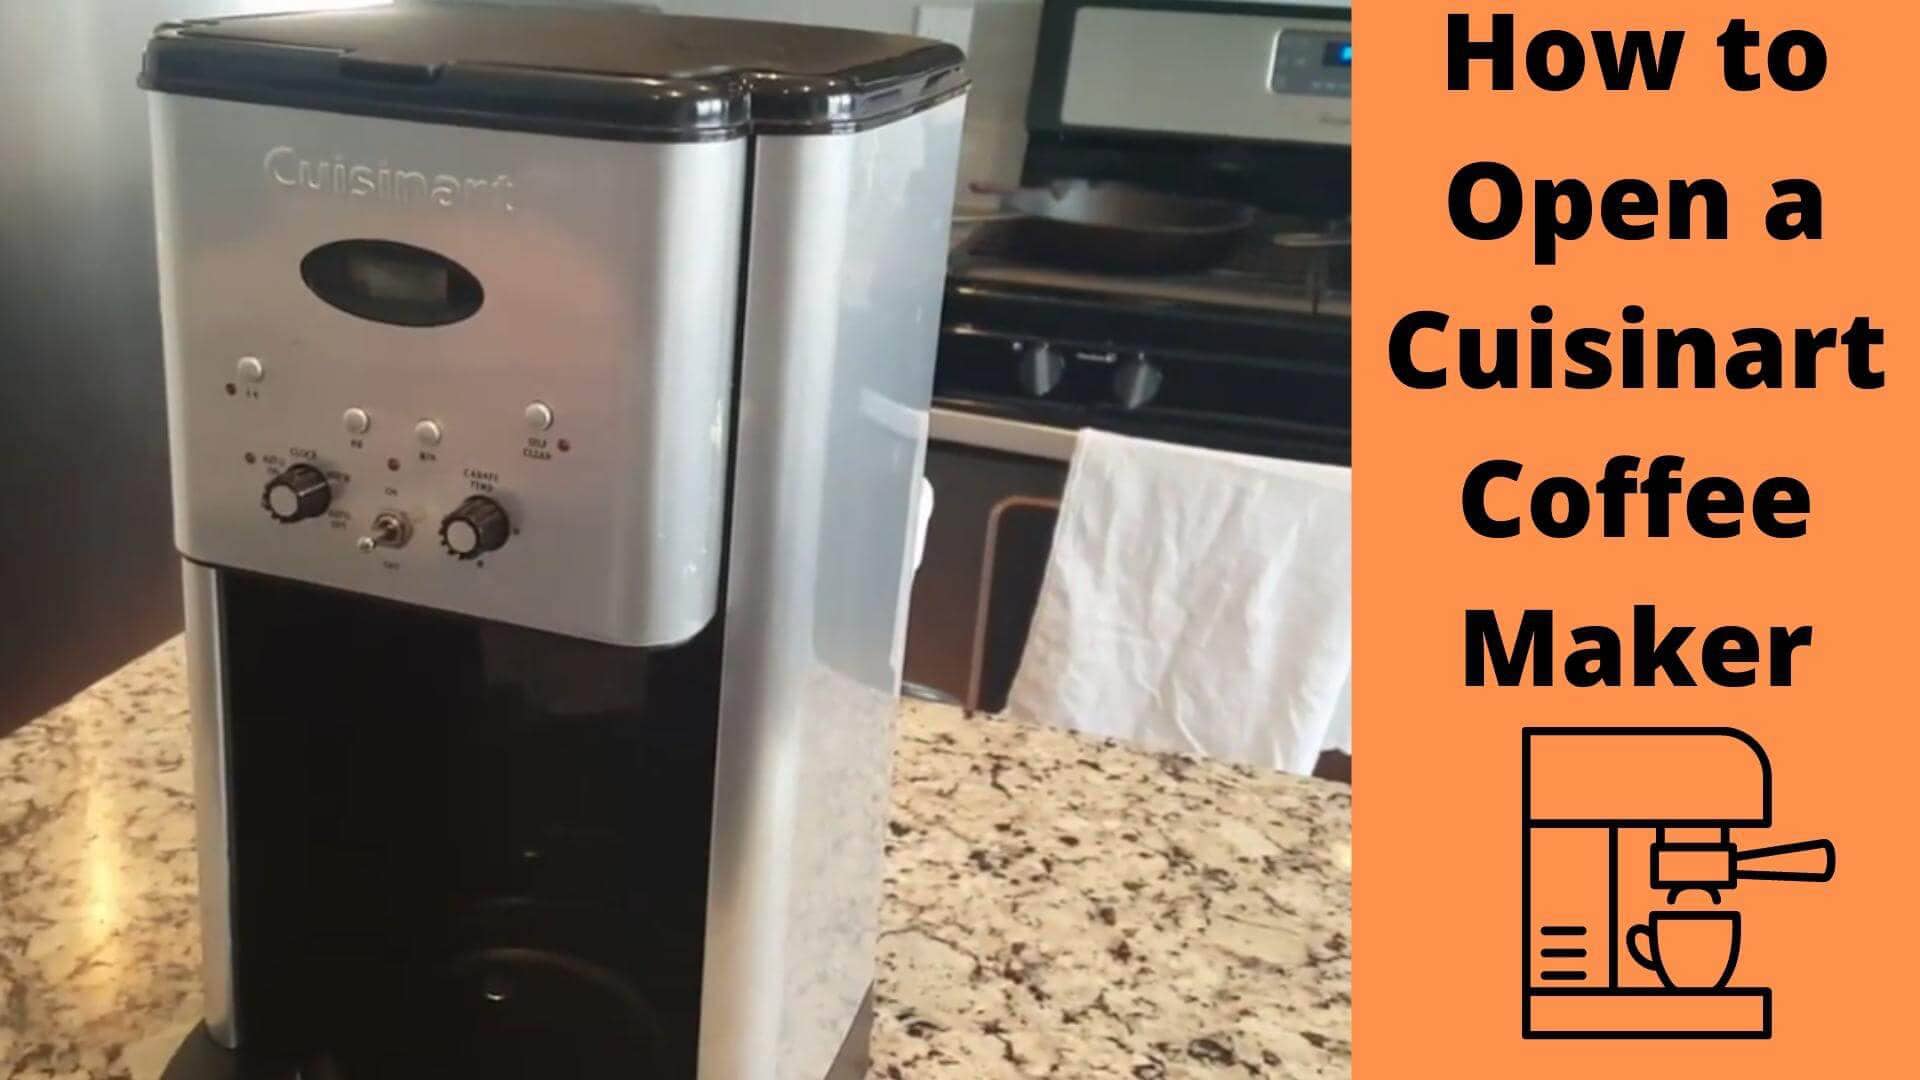 How to Open a Cuisinart Coffee Maker